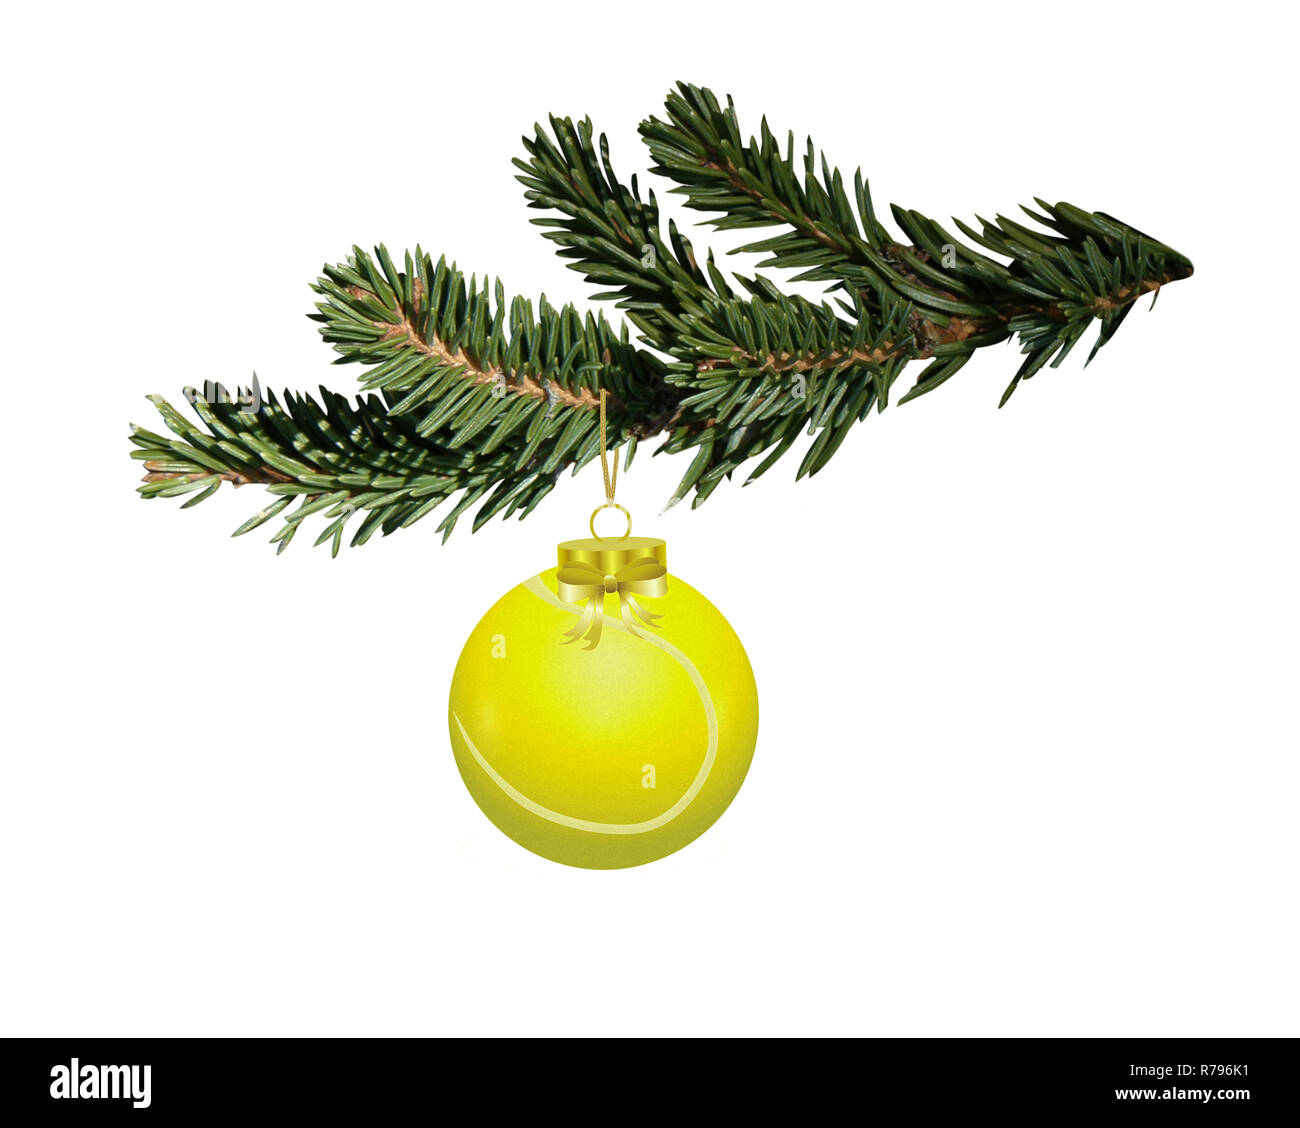 Tennis christmas ball hanging on the fir branch, Sports steeling cars Stock Photo